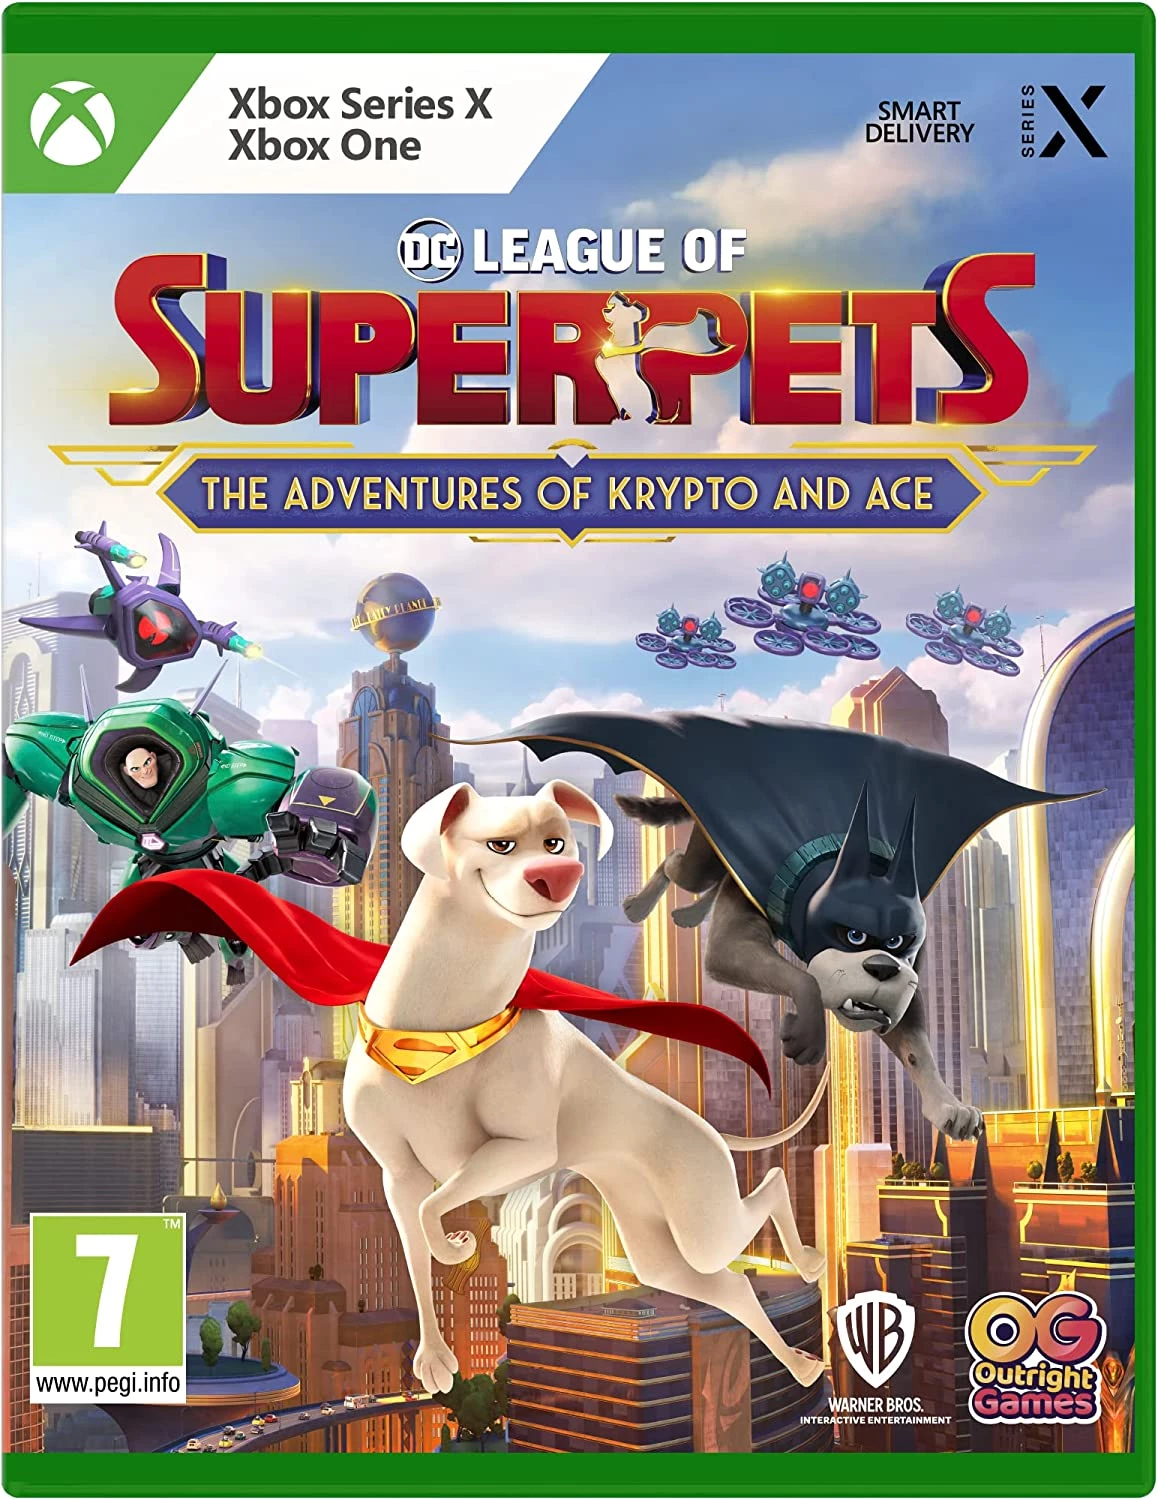 DC League of Super Pets: The Adventures of Krypto and Ace (Xbox One), Outright Games